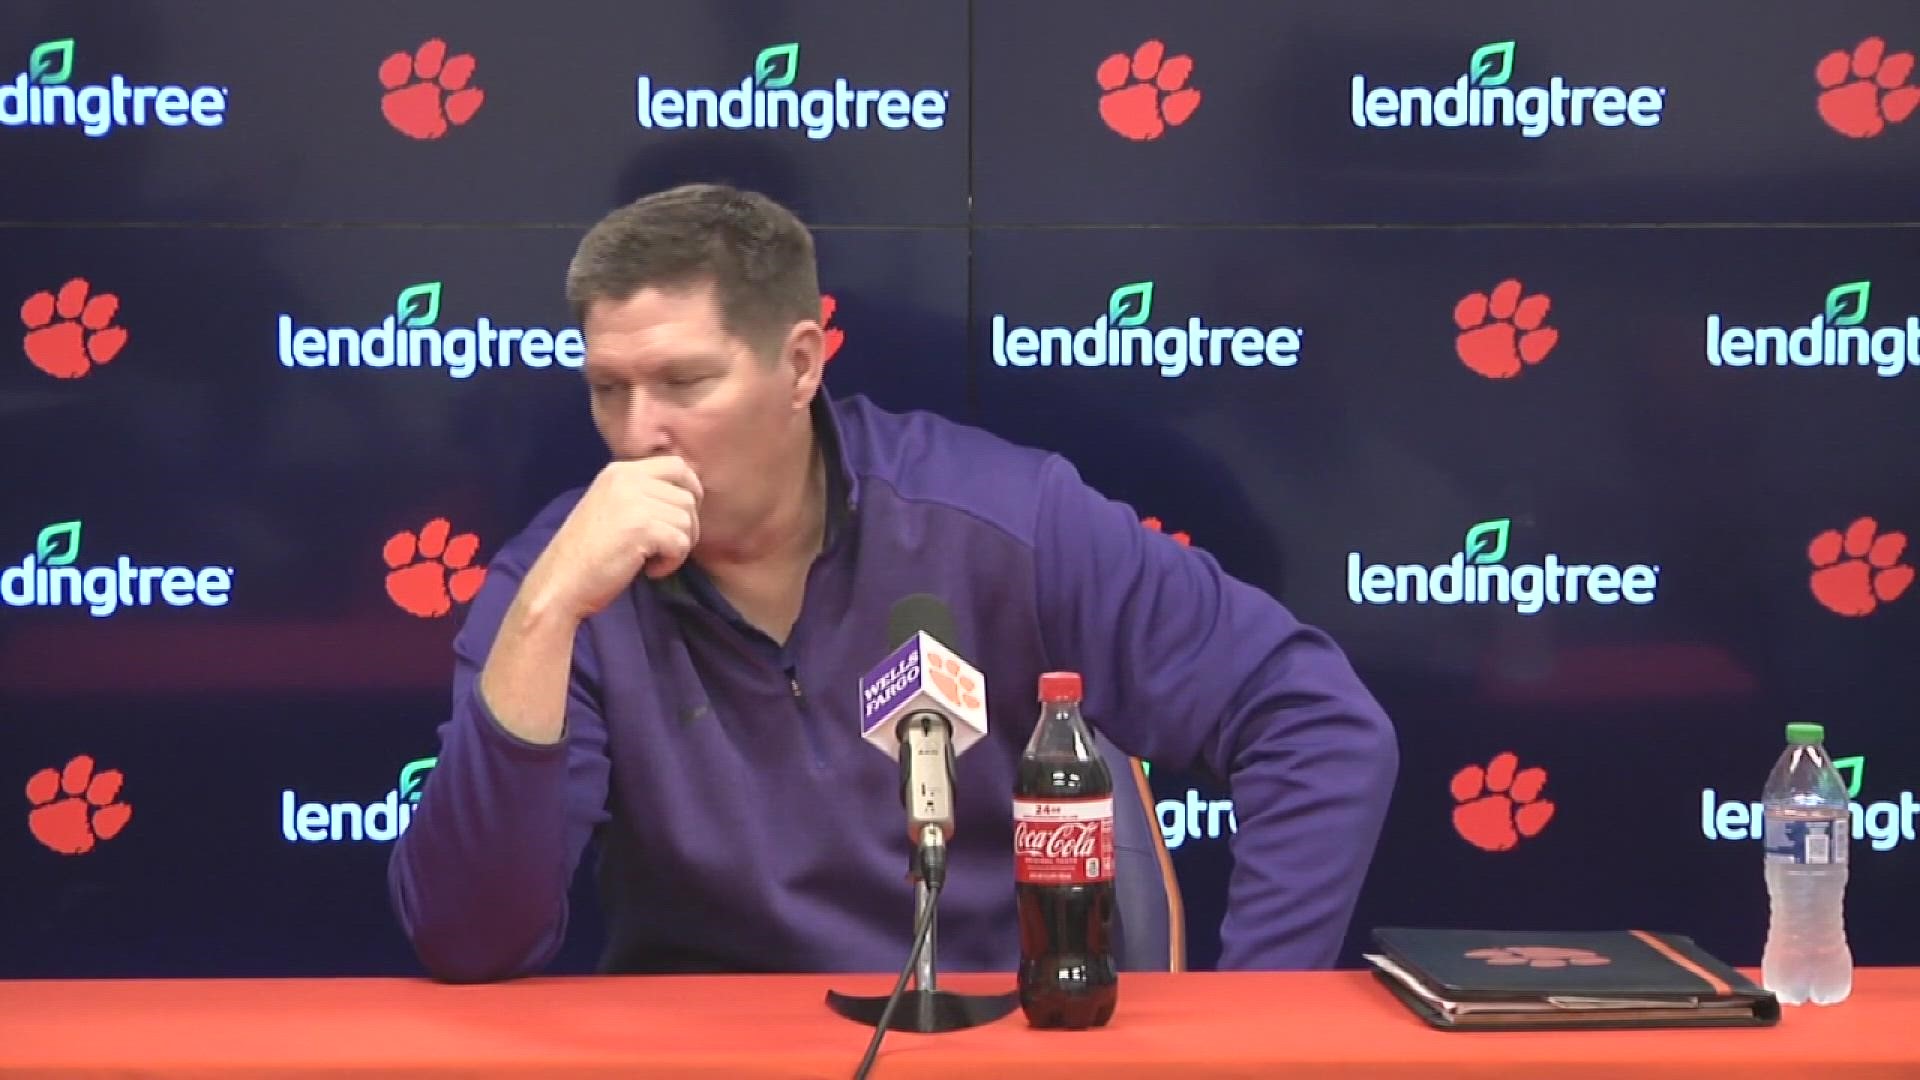 Clemson head basketball coach Brad Brownell talks about the 80-75 win over Towson which featured a 9:00 pm tipoff at Littlejohn Coliseum.